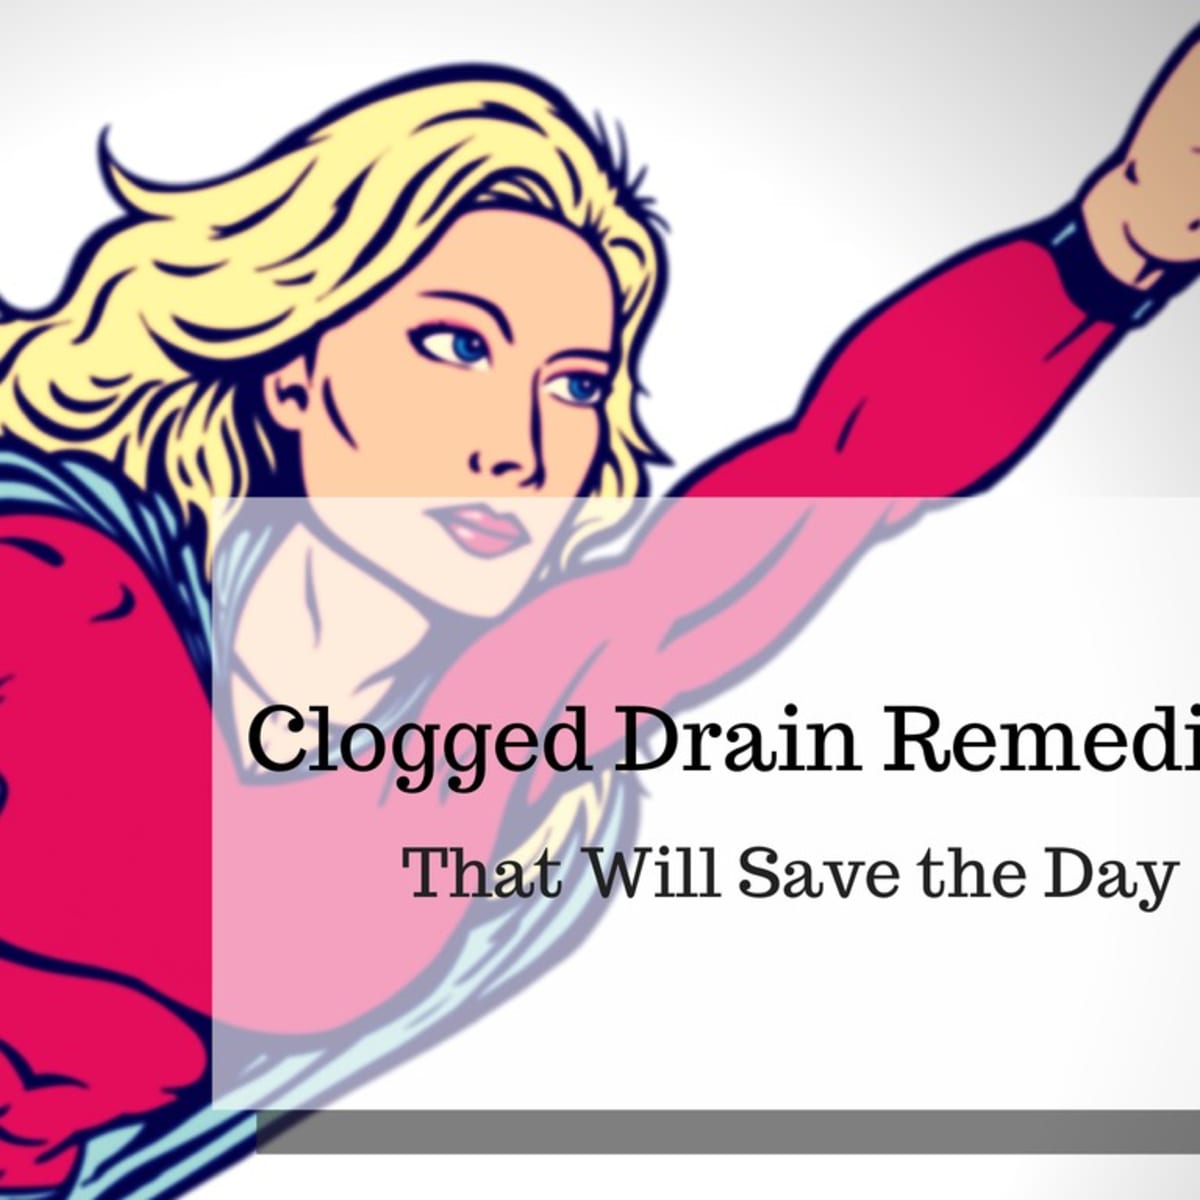 Clogged Drain? Home Remedies That Actually Work - Dengarden